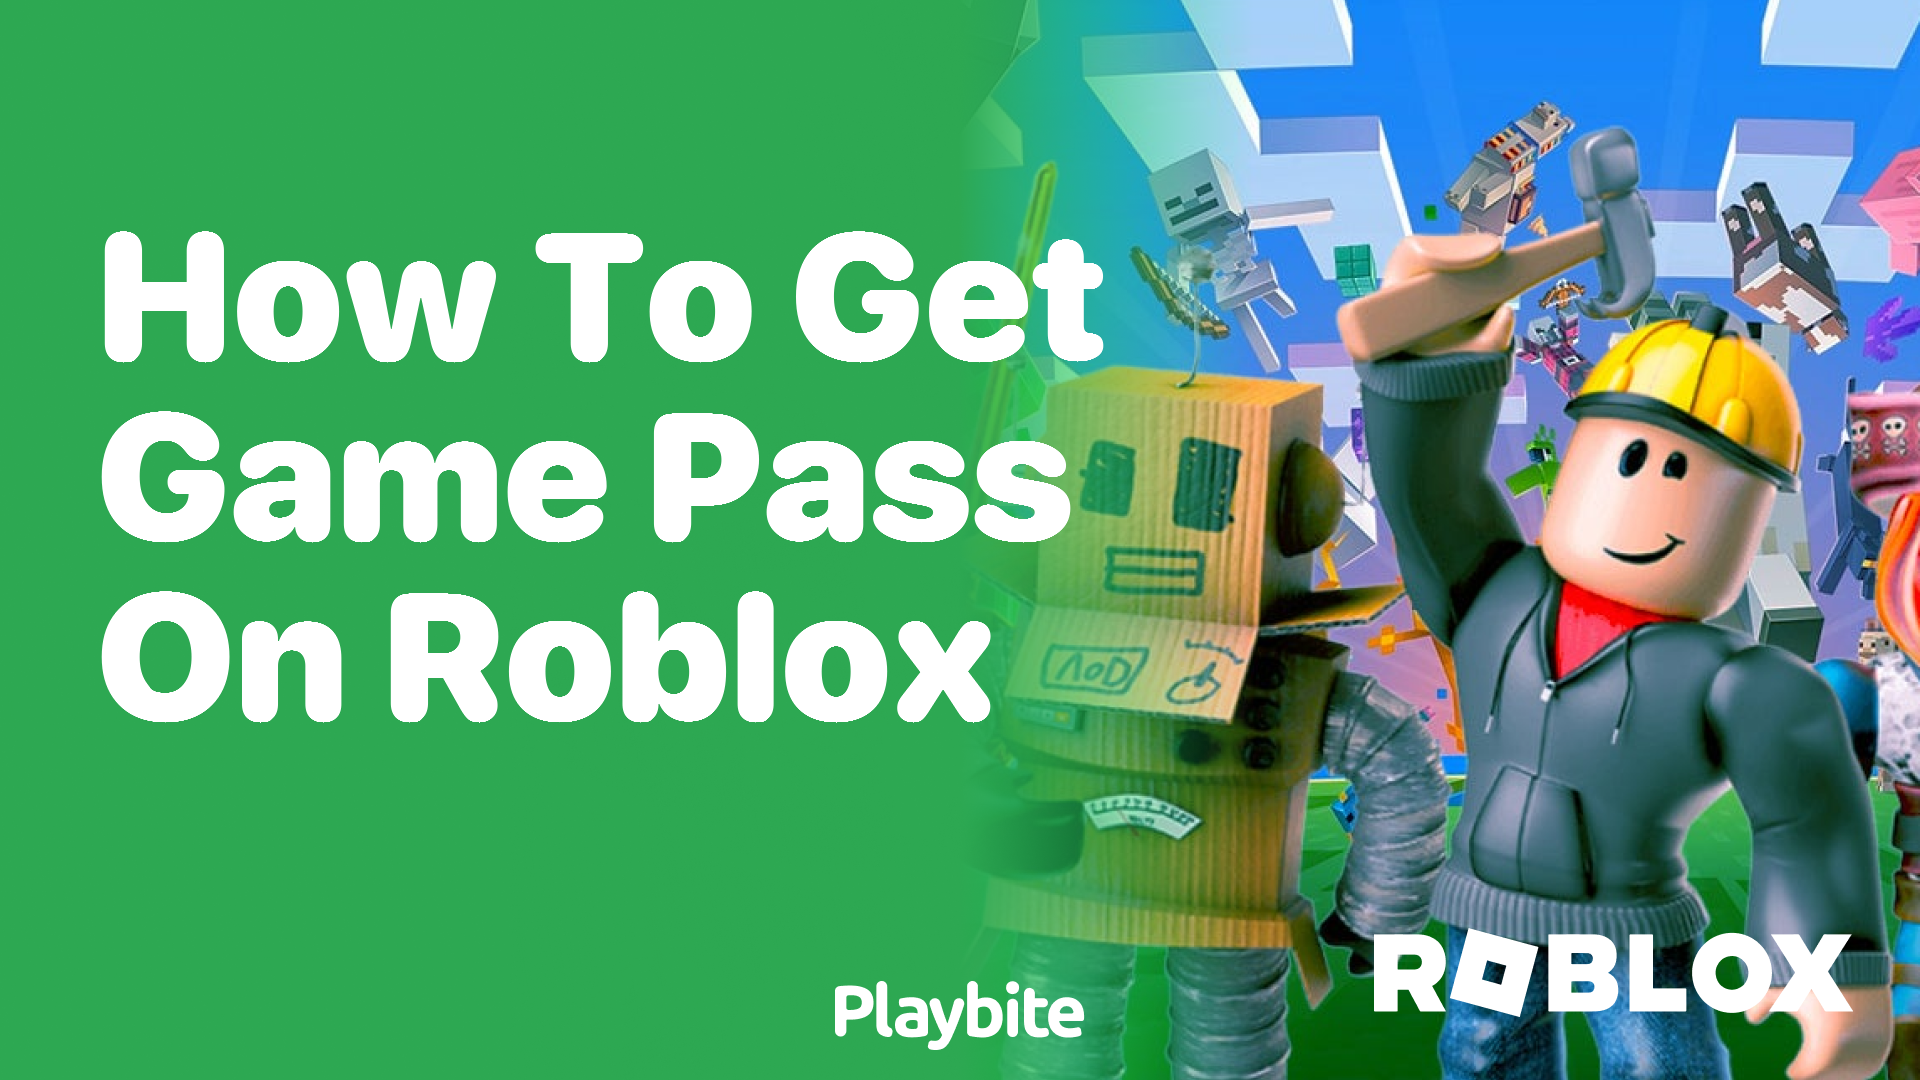 How to Get a Game Pass on Roblox